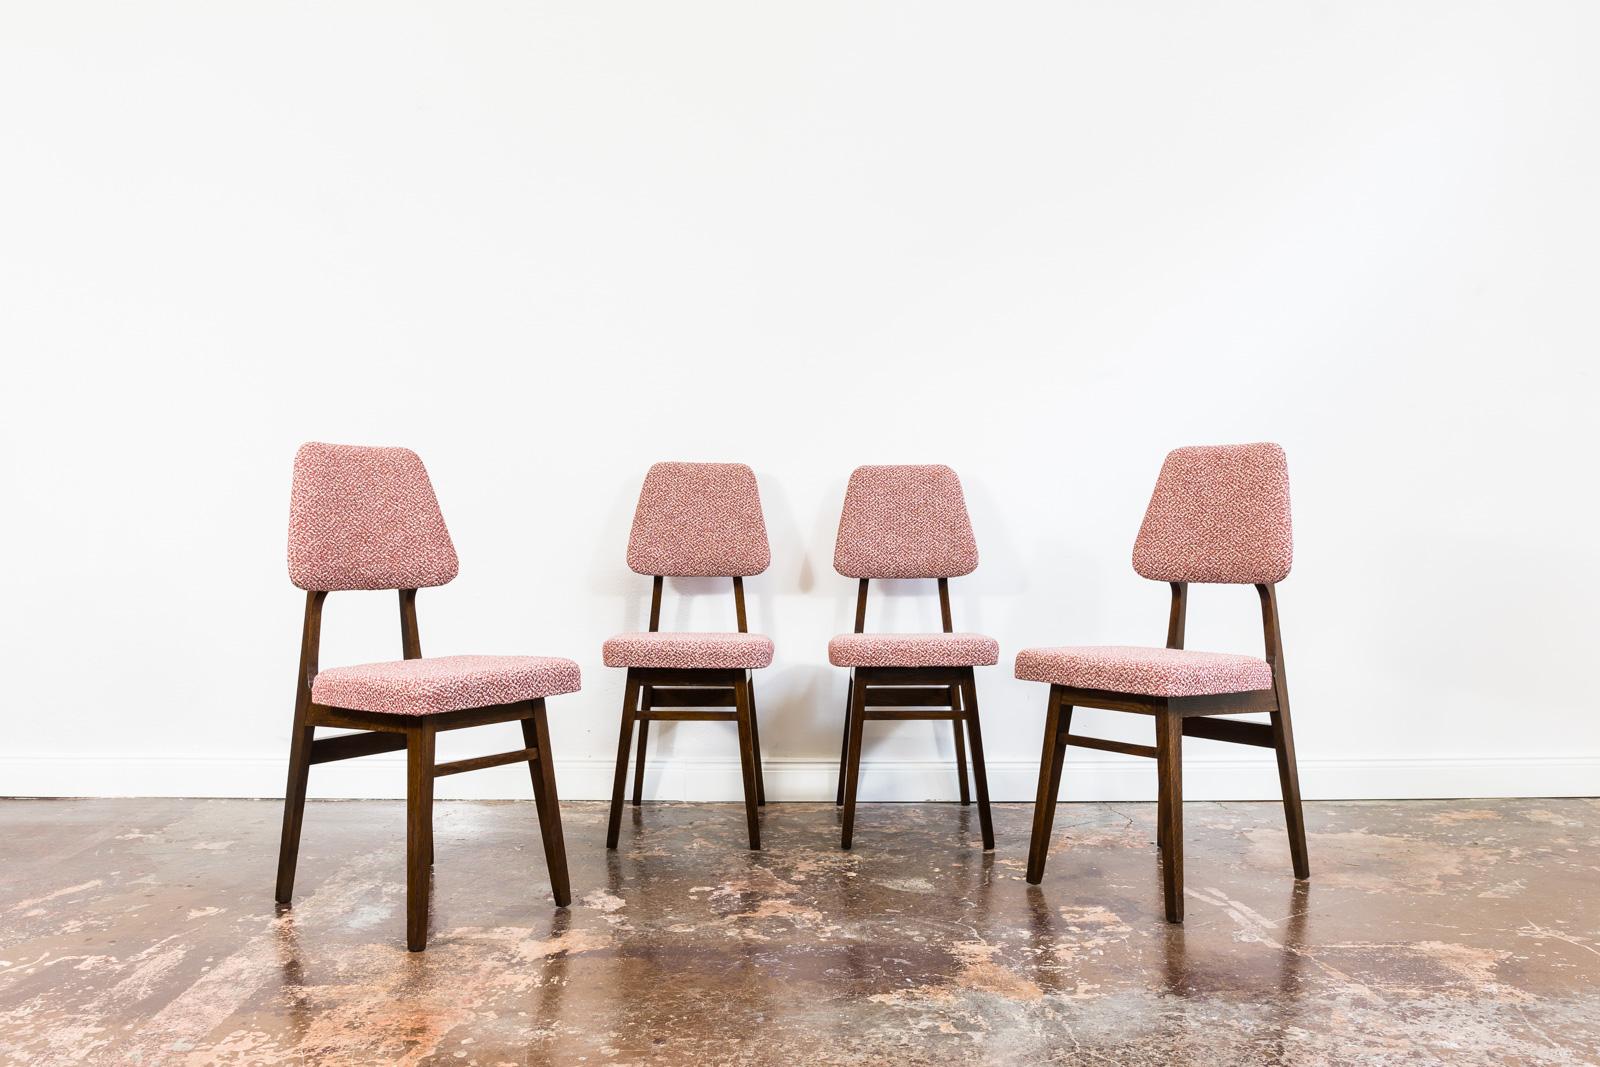 Set of 4 restored vintage oak wood dining chairs, 1960s, Poland.
This set has been completely restored.